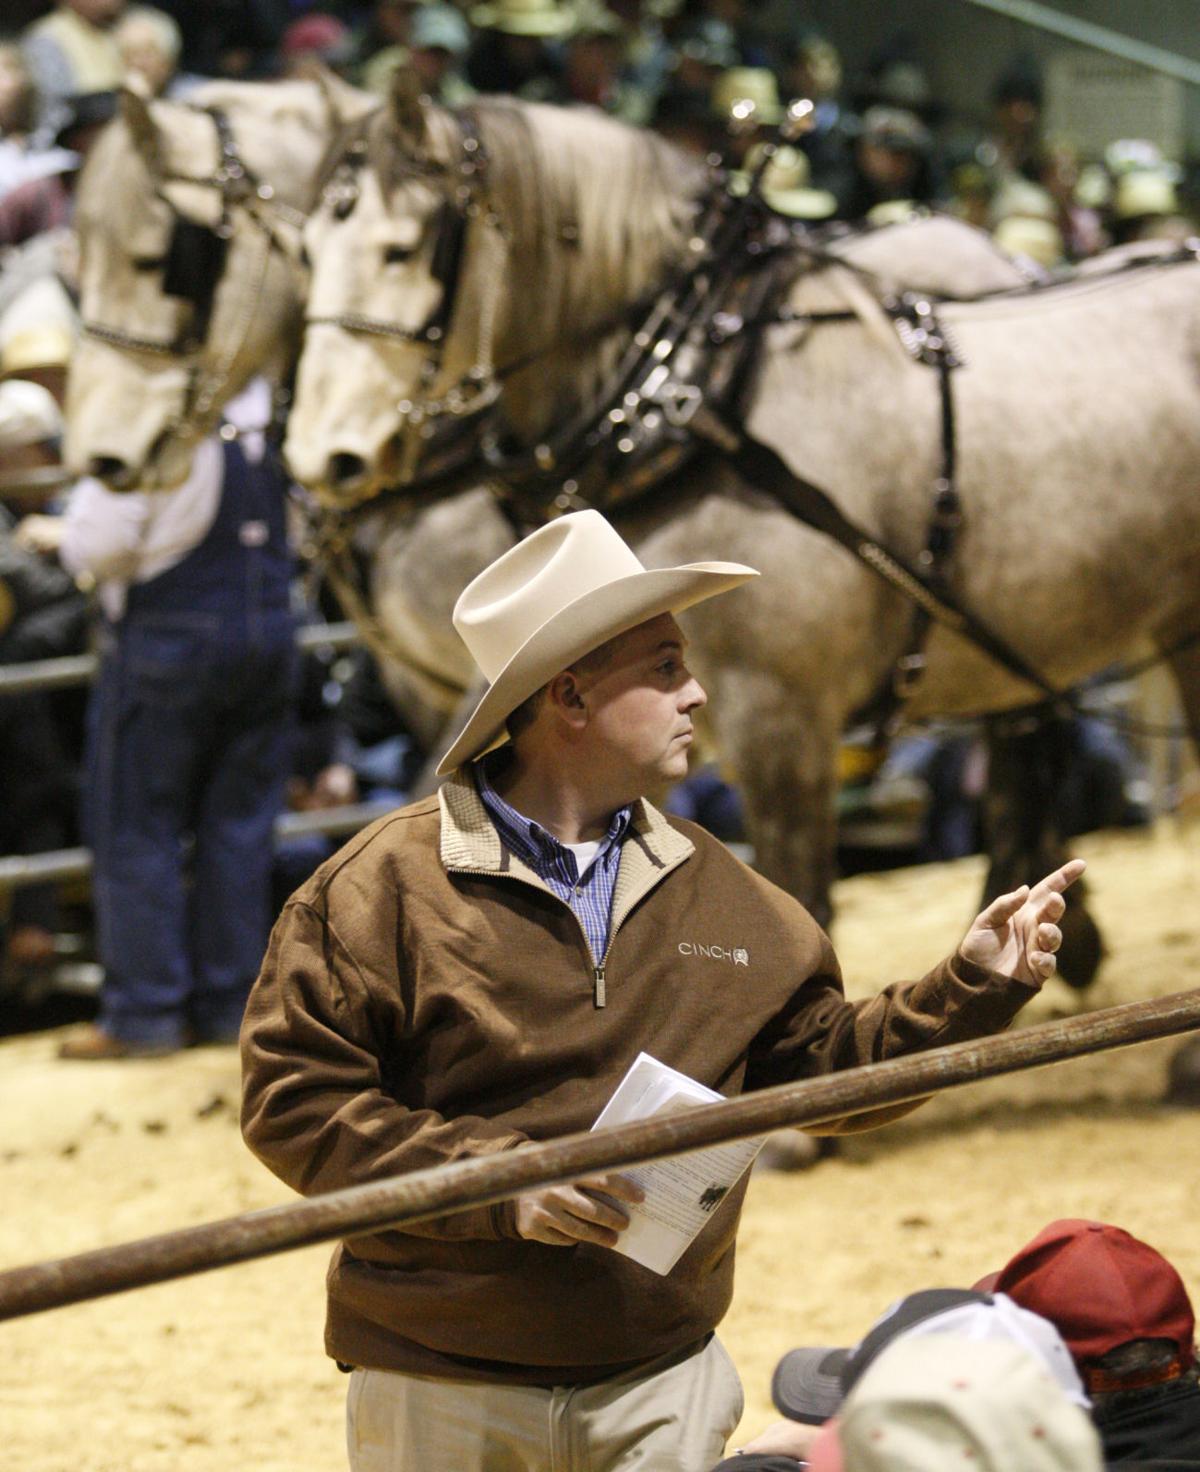 Waverly horse sale attracts enthusiastic bidders from across the